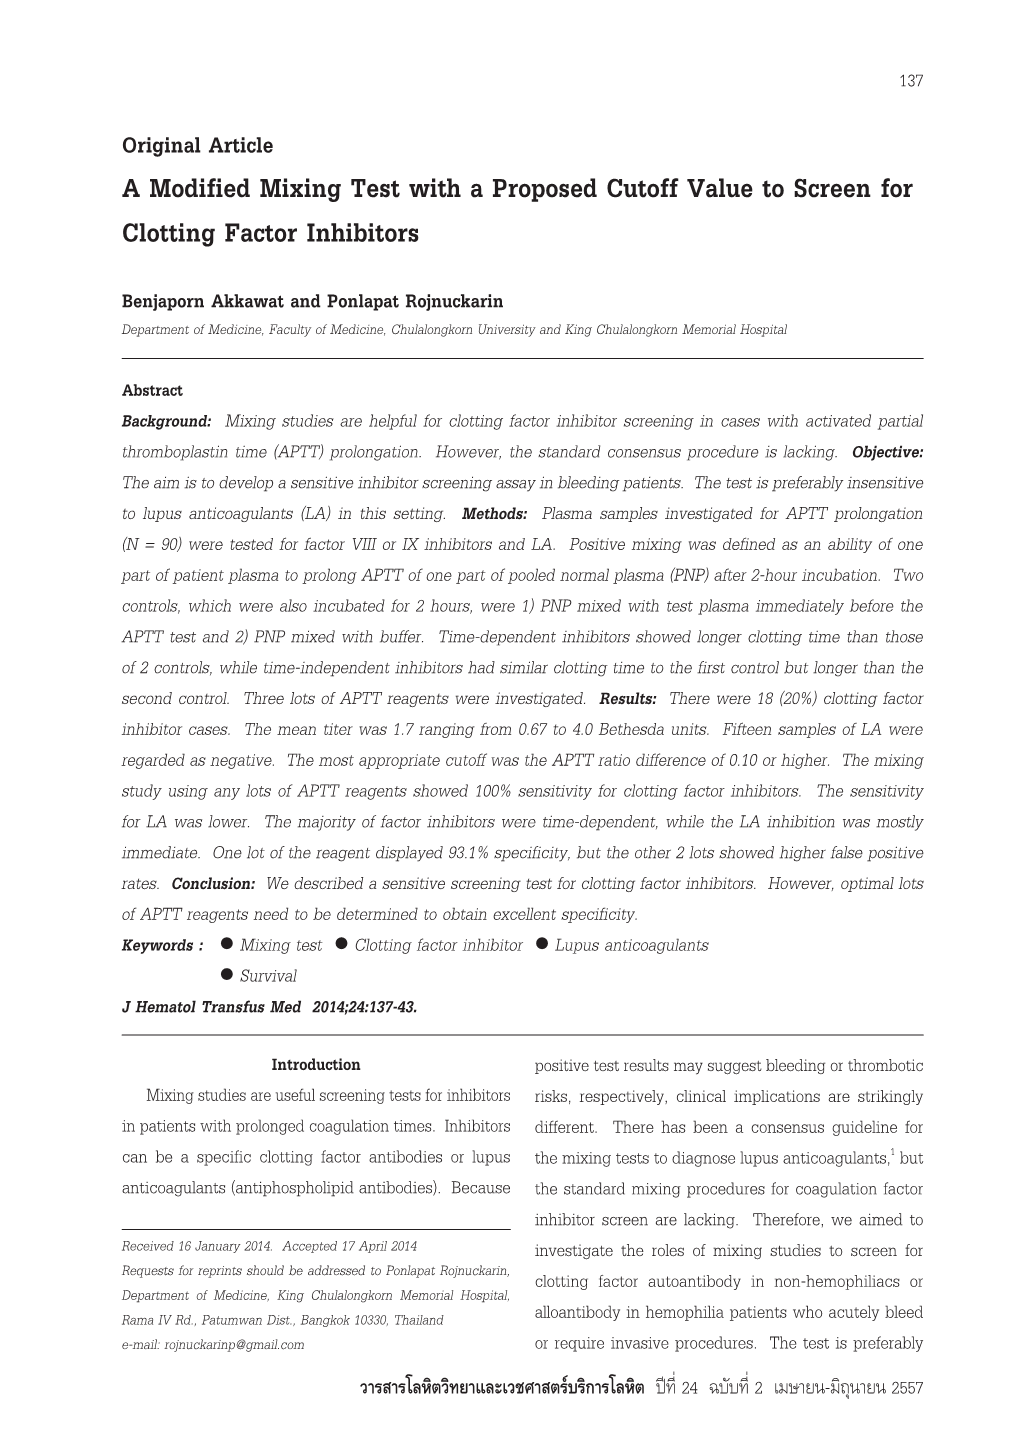 A Modified Mixing Test with a Proposed Cutoff Value to Screen for Clotting Factor Inhibitors